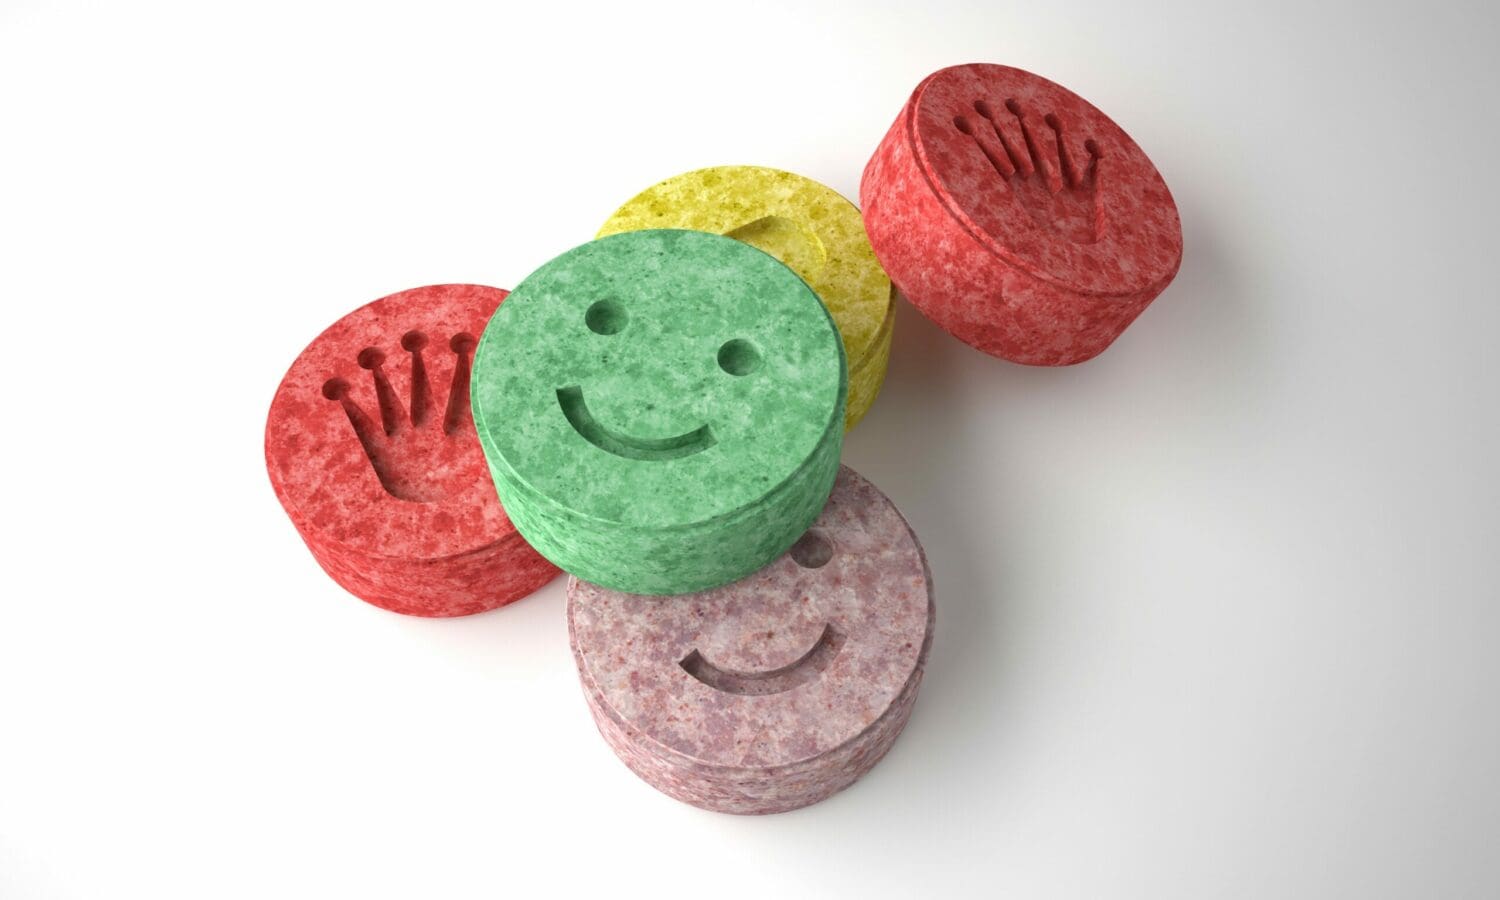 Ecstasy: effects on the body